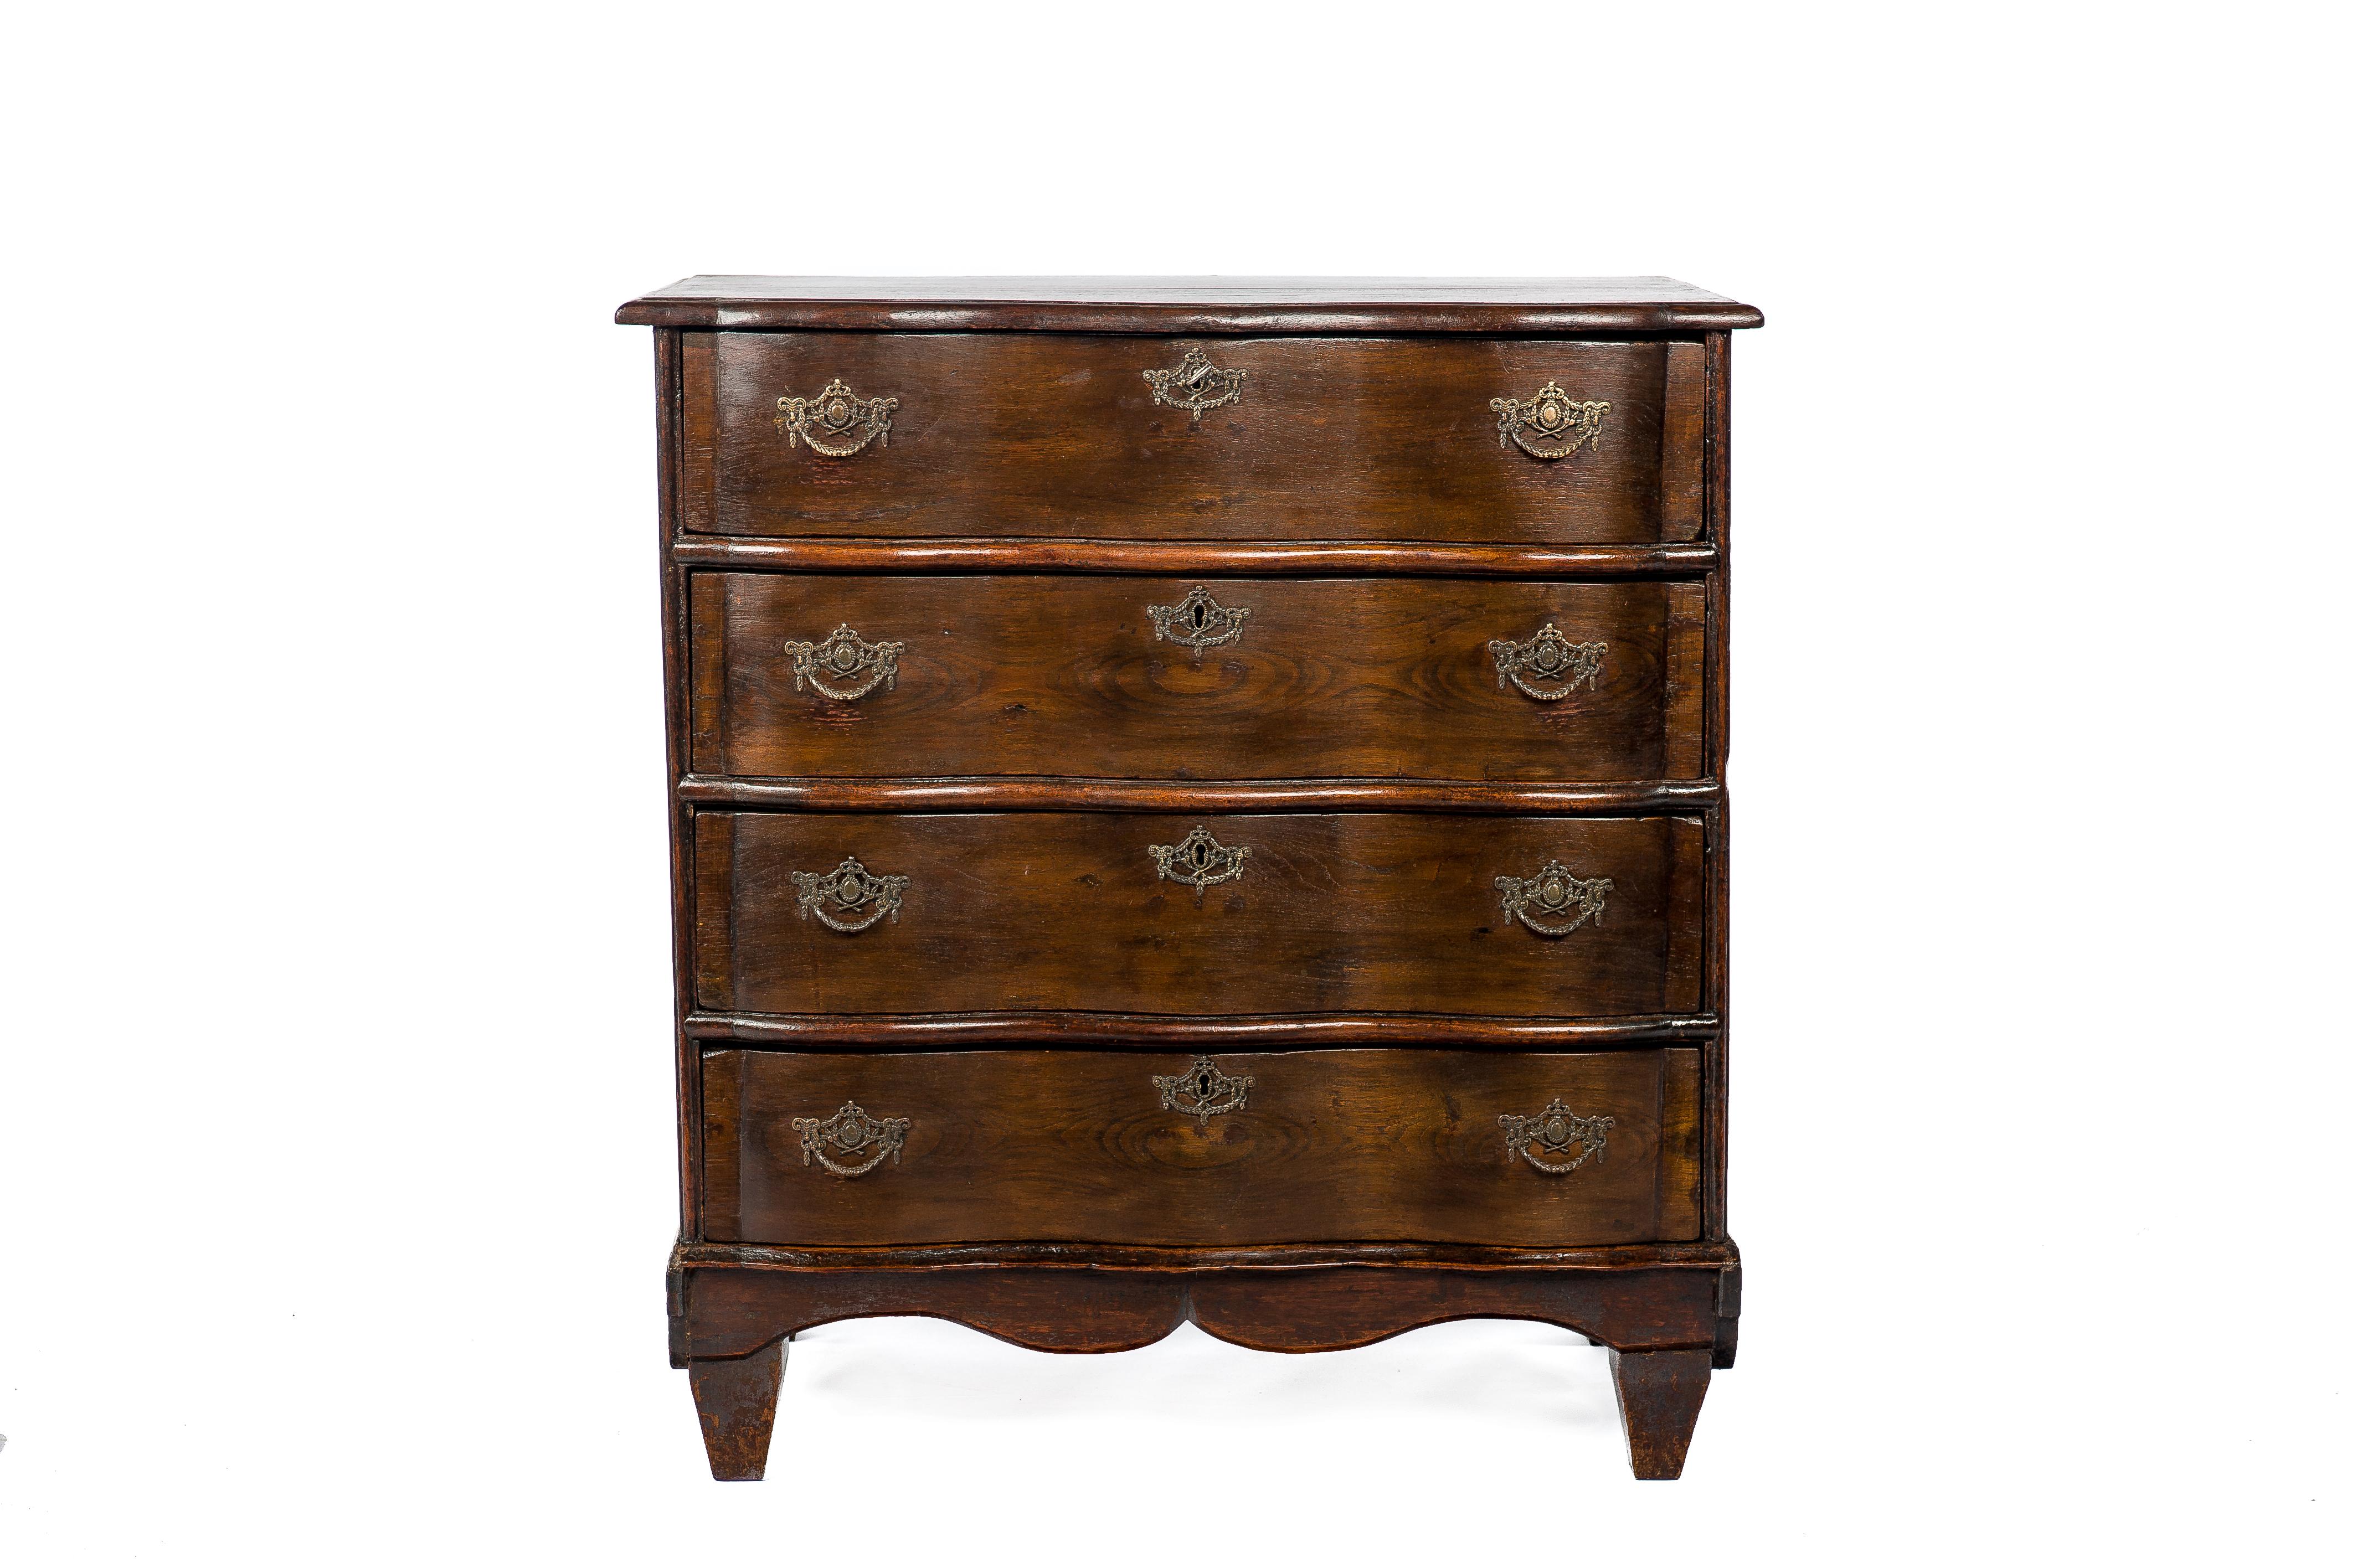 This elegant four-drawer commode was made in the Netherlands circa 1860. It was made in solid elm with a pine interior. The commode has a convex-concave curved front. The piece has a two-plank top with a bullnose edge. Below four drawers are